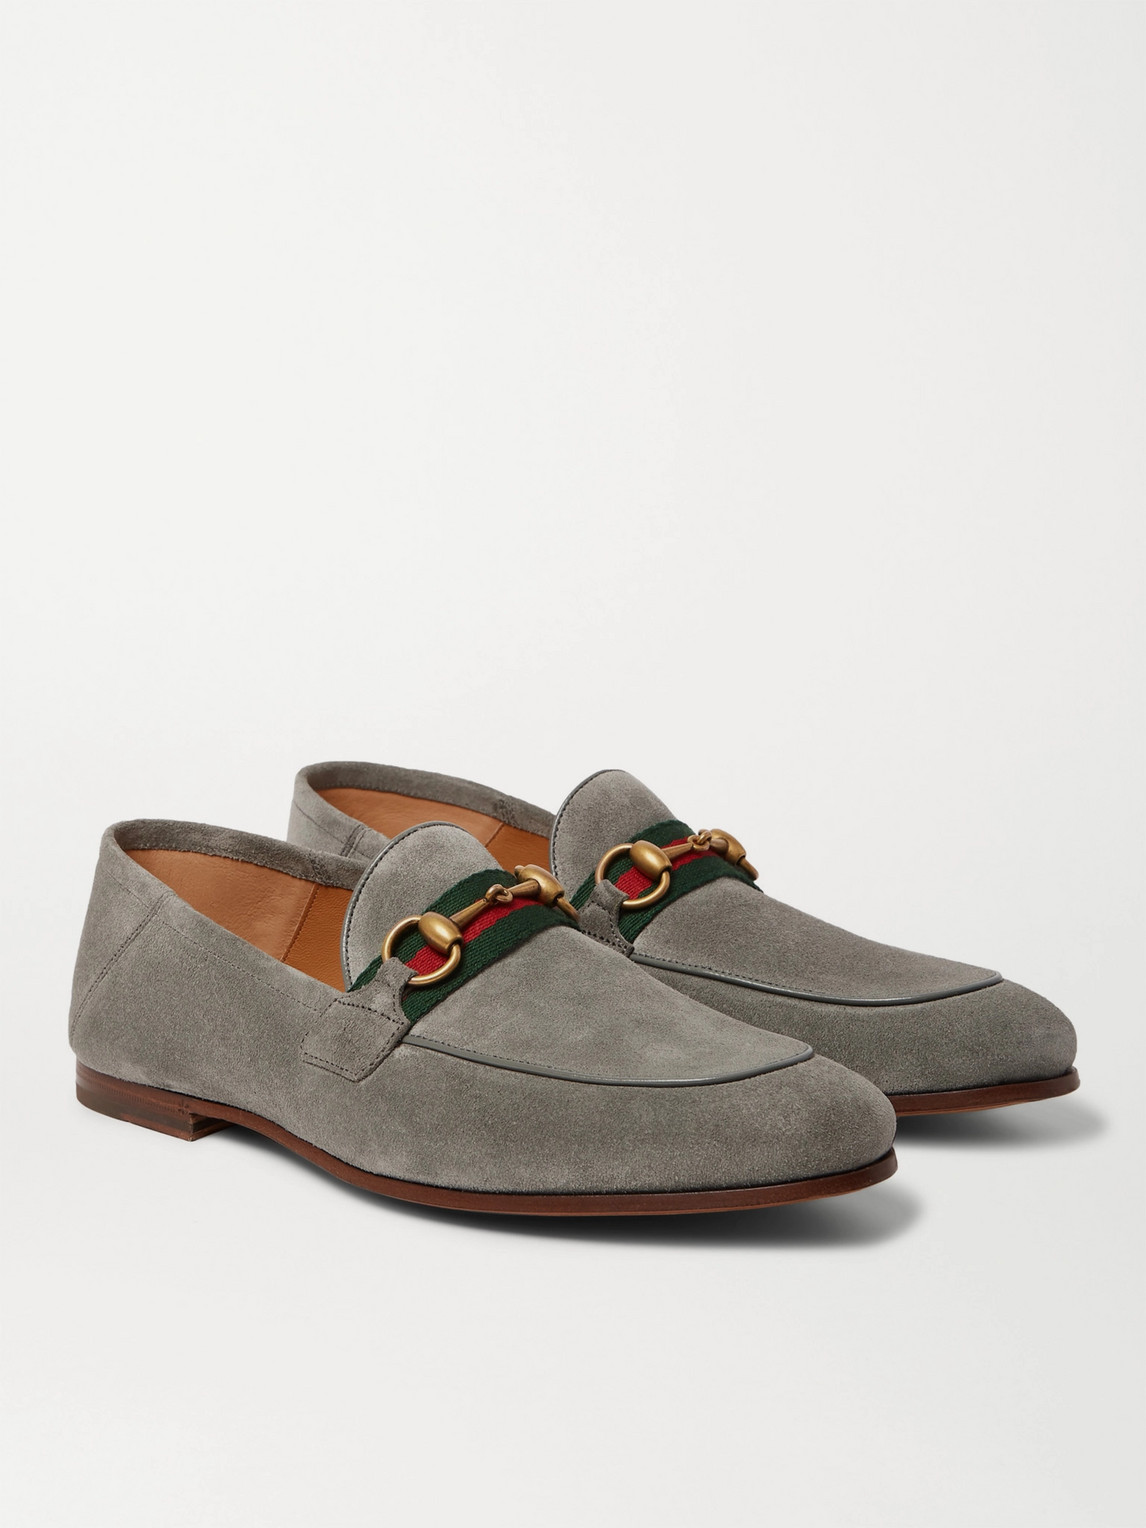 GUCCI BRIXTON HORSEBIT WEBBING-TRIMMED COLLAPSIBLE-HEEL SUEDE LOAFERS